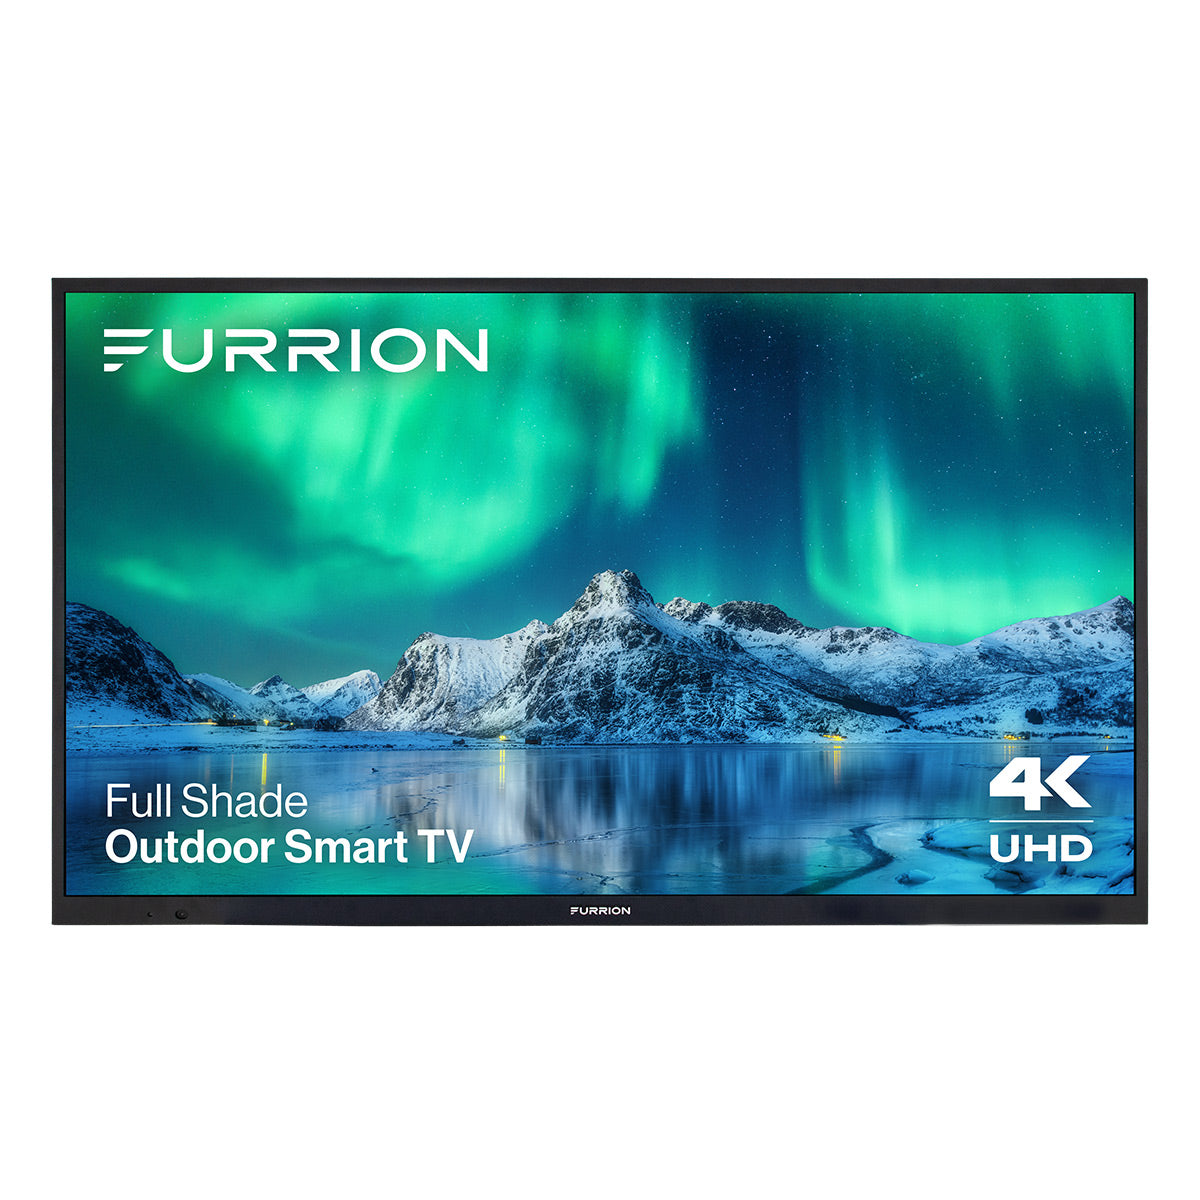 Furrion Aurora 55" Full Shade Smart 4K Ultra-High Definition LED Outdoor TV with IP54 Weatherproof Protection